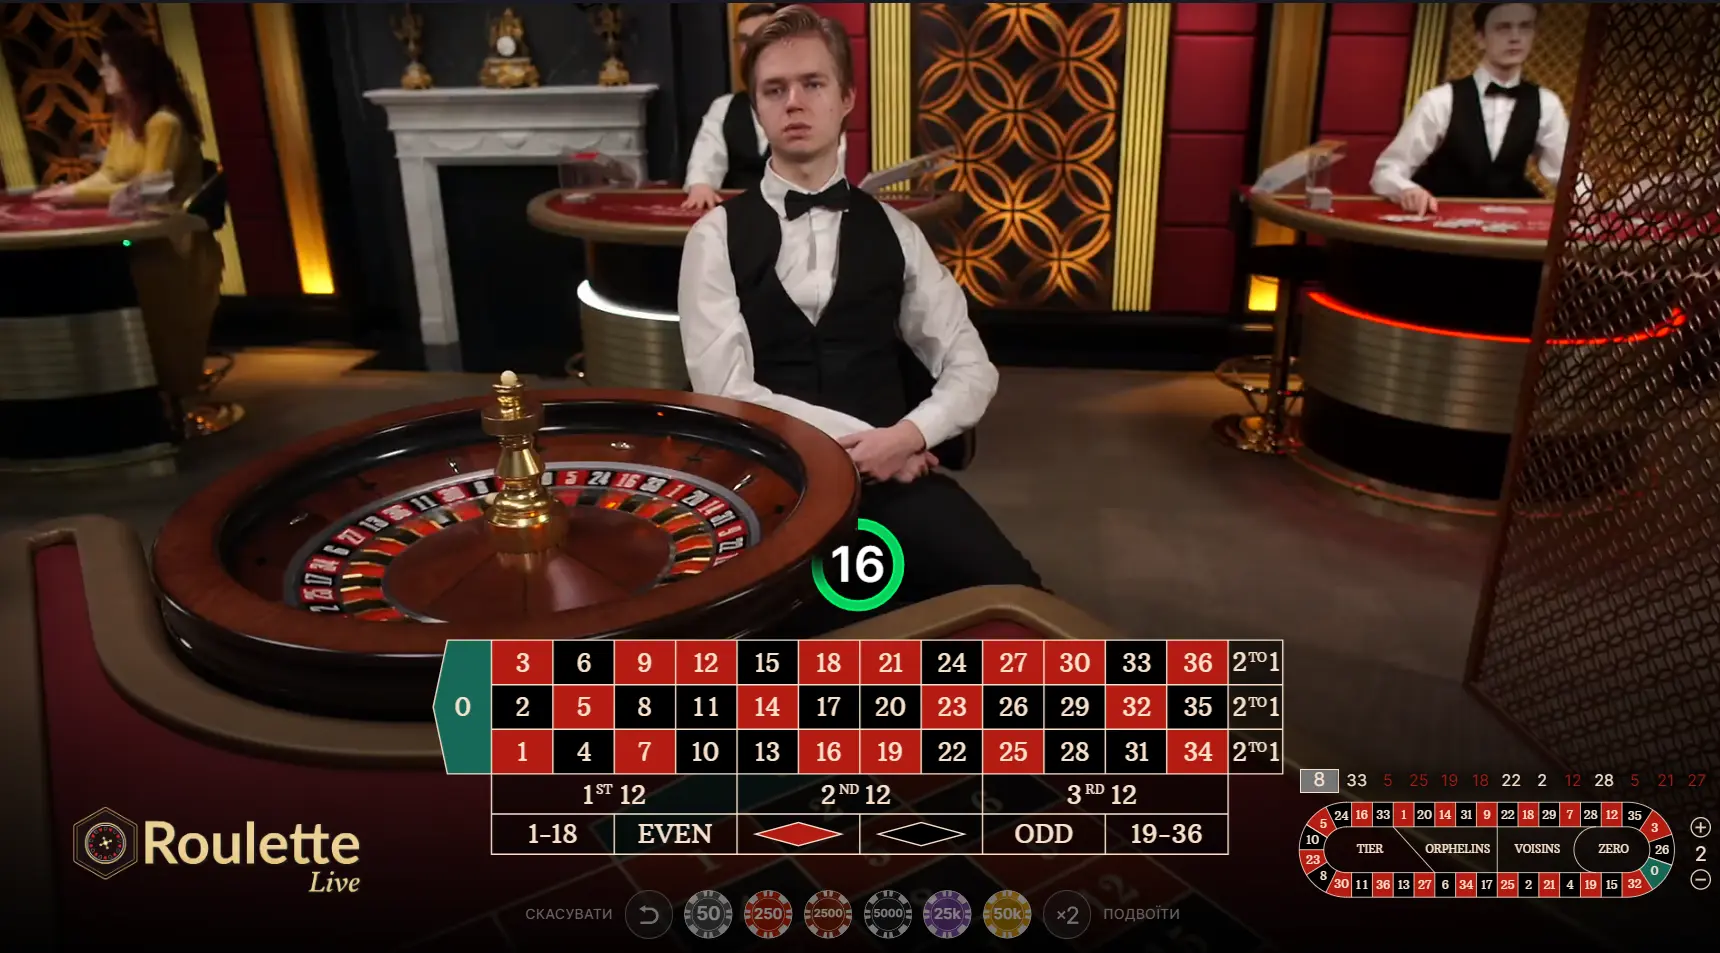 Roulette is one of the oldest and the most exciting casino games